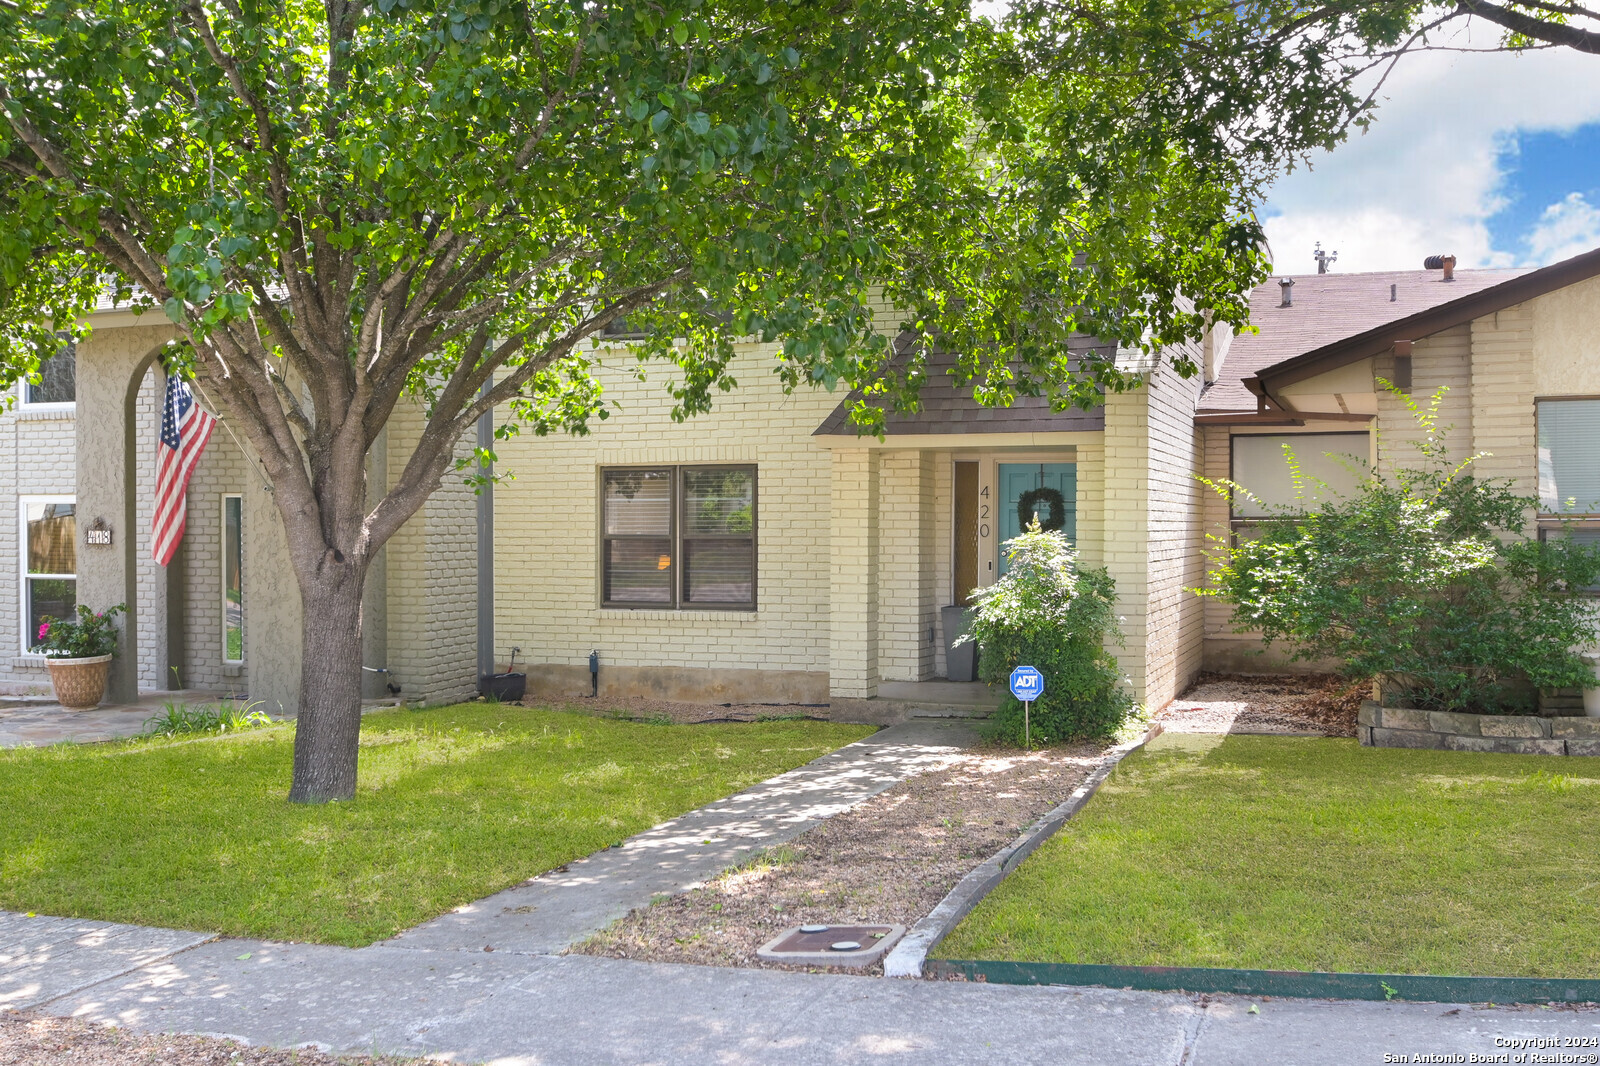 View Universal City, TX 78148 townhome